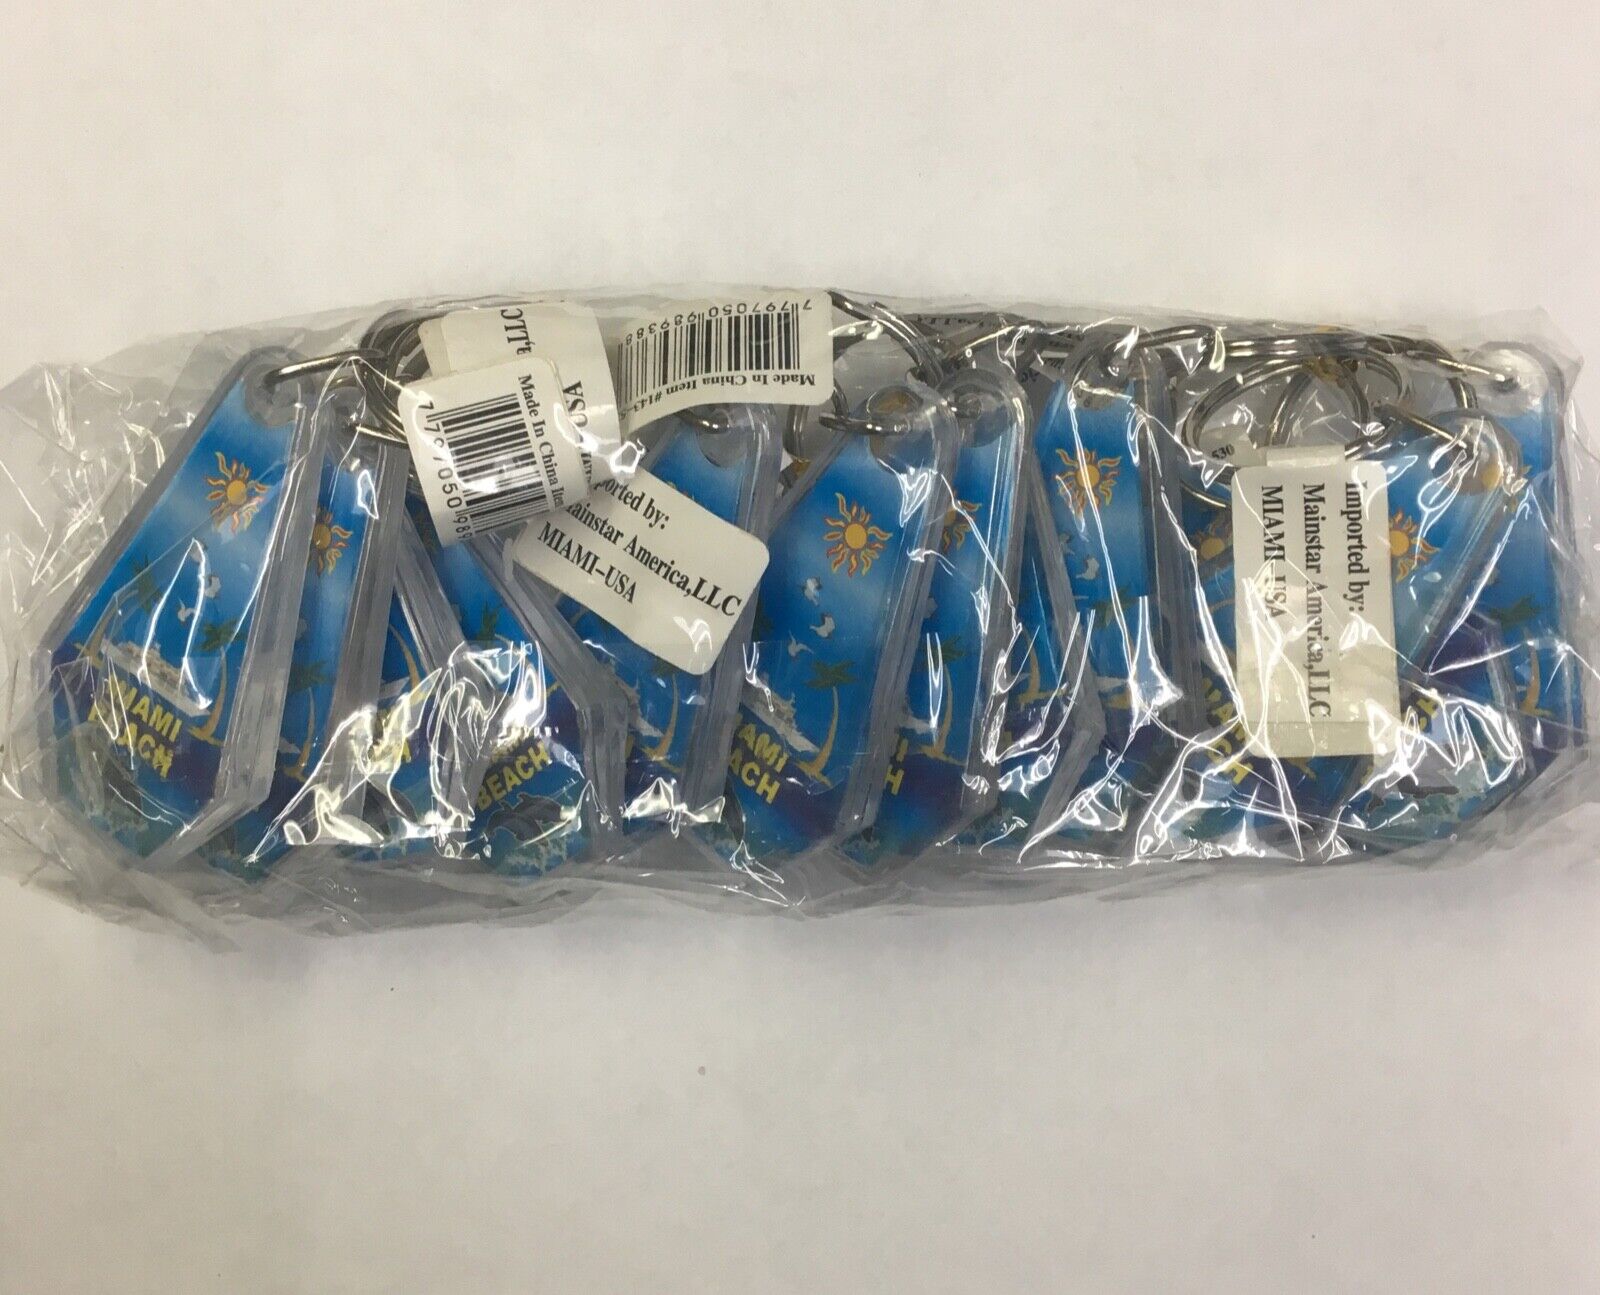 12 Pieces  Miami Beach Souvenir Keychain Plastic Double Sided New, Great Gift